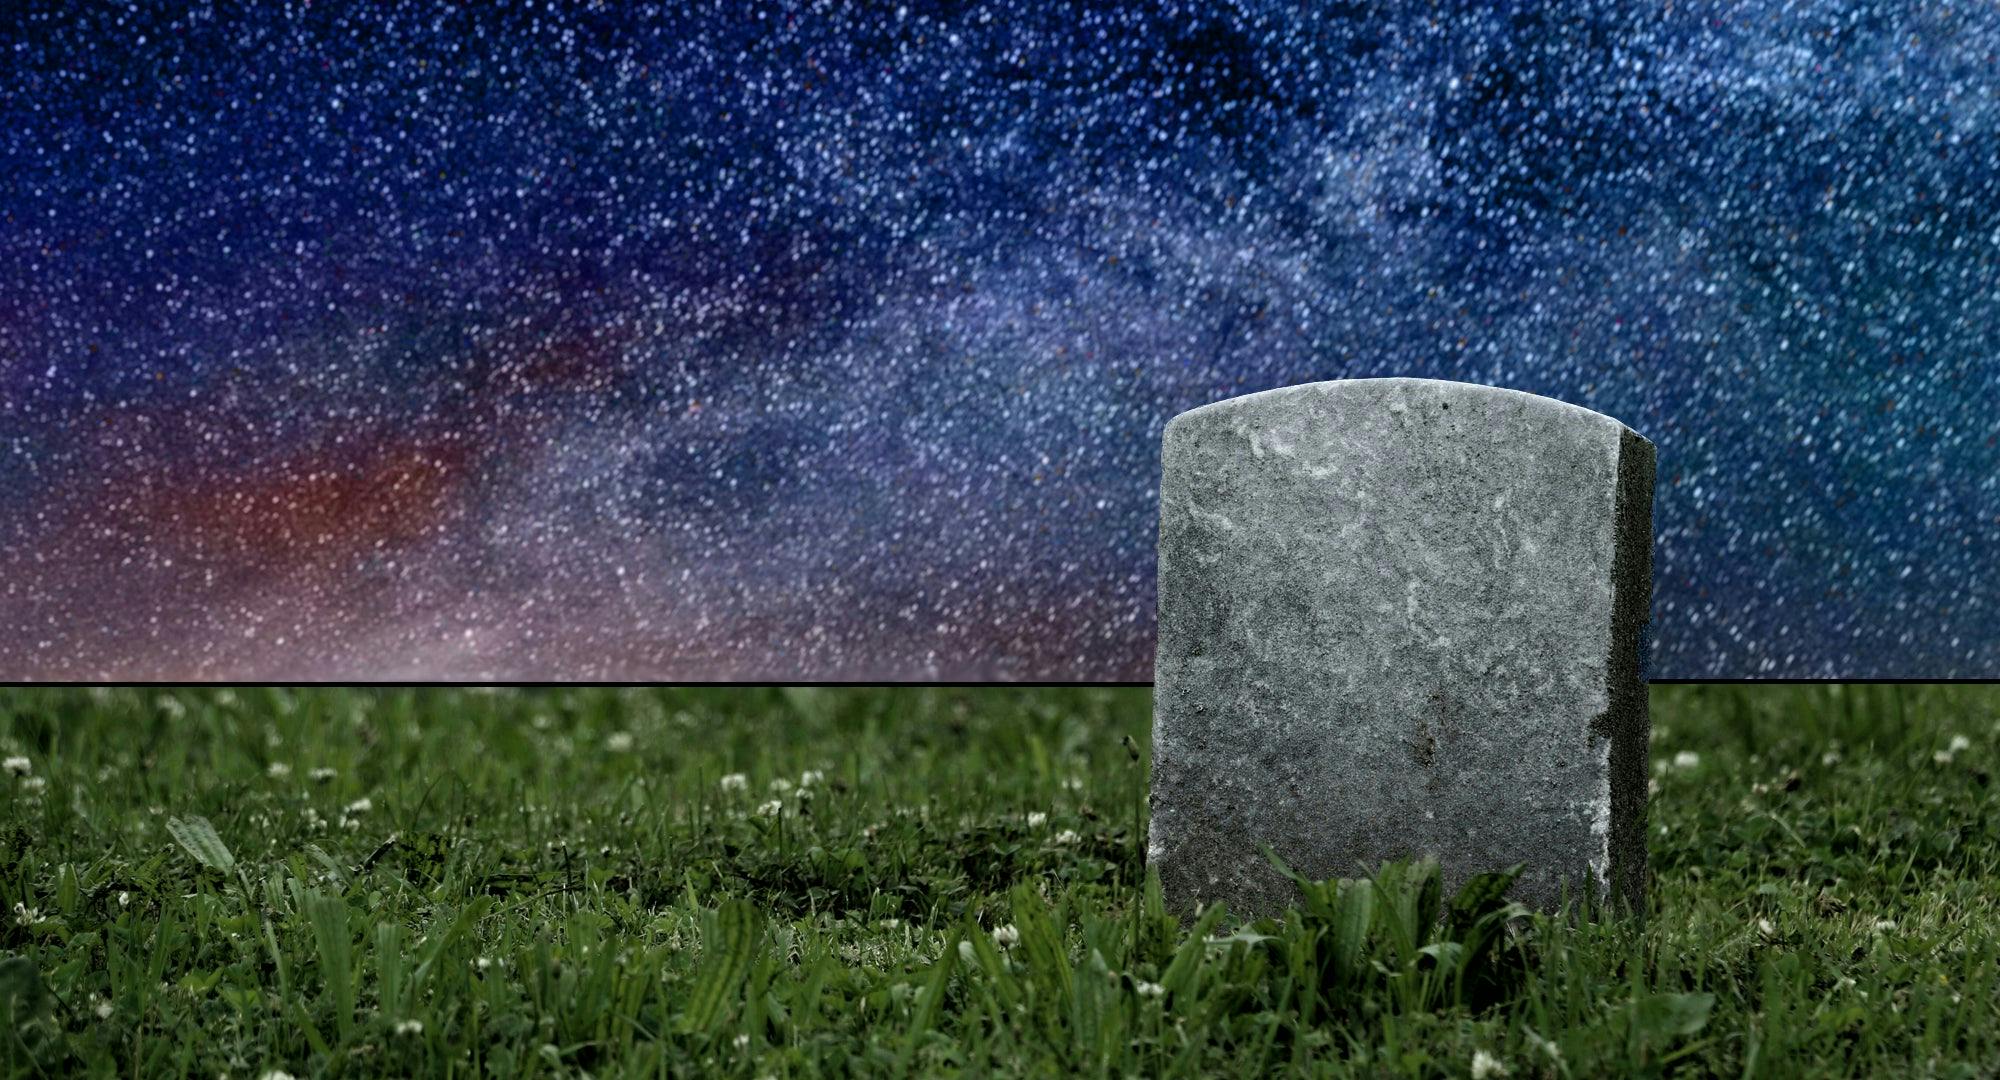 A tombstone surrounded by stars and grass.